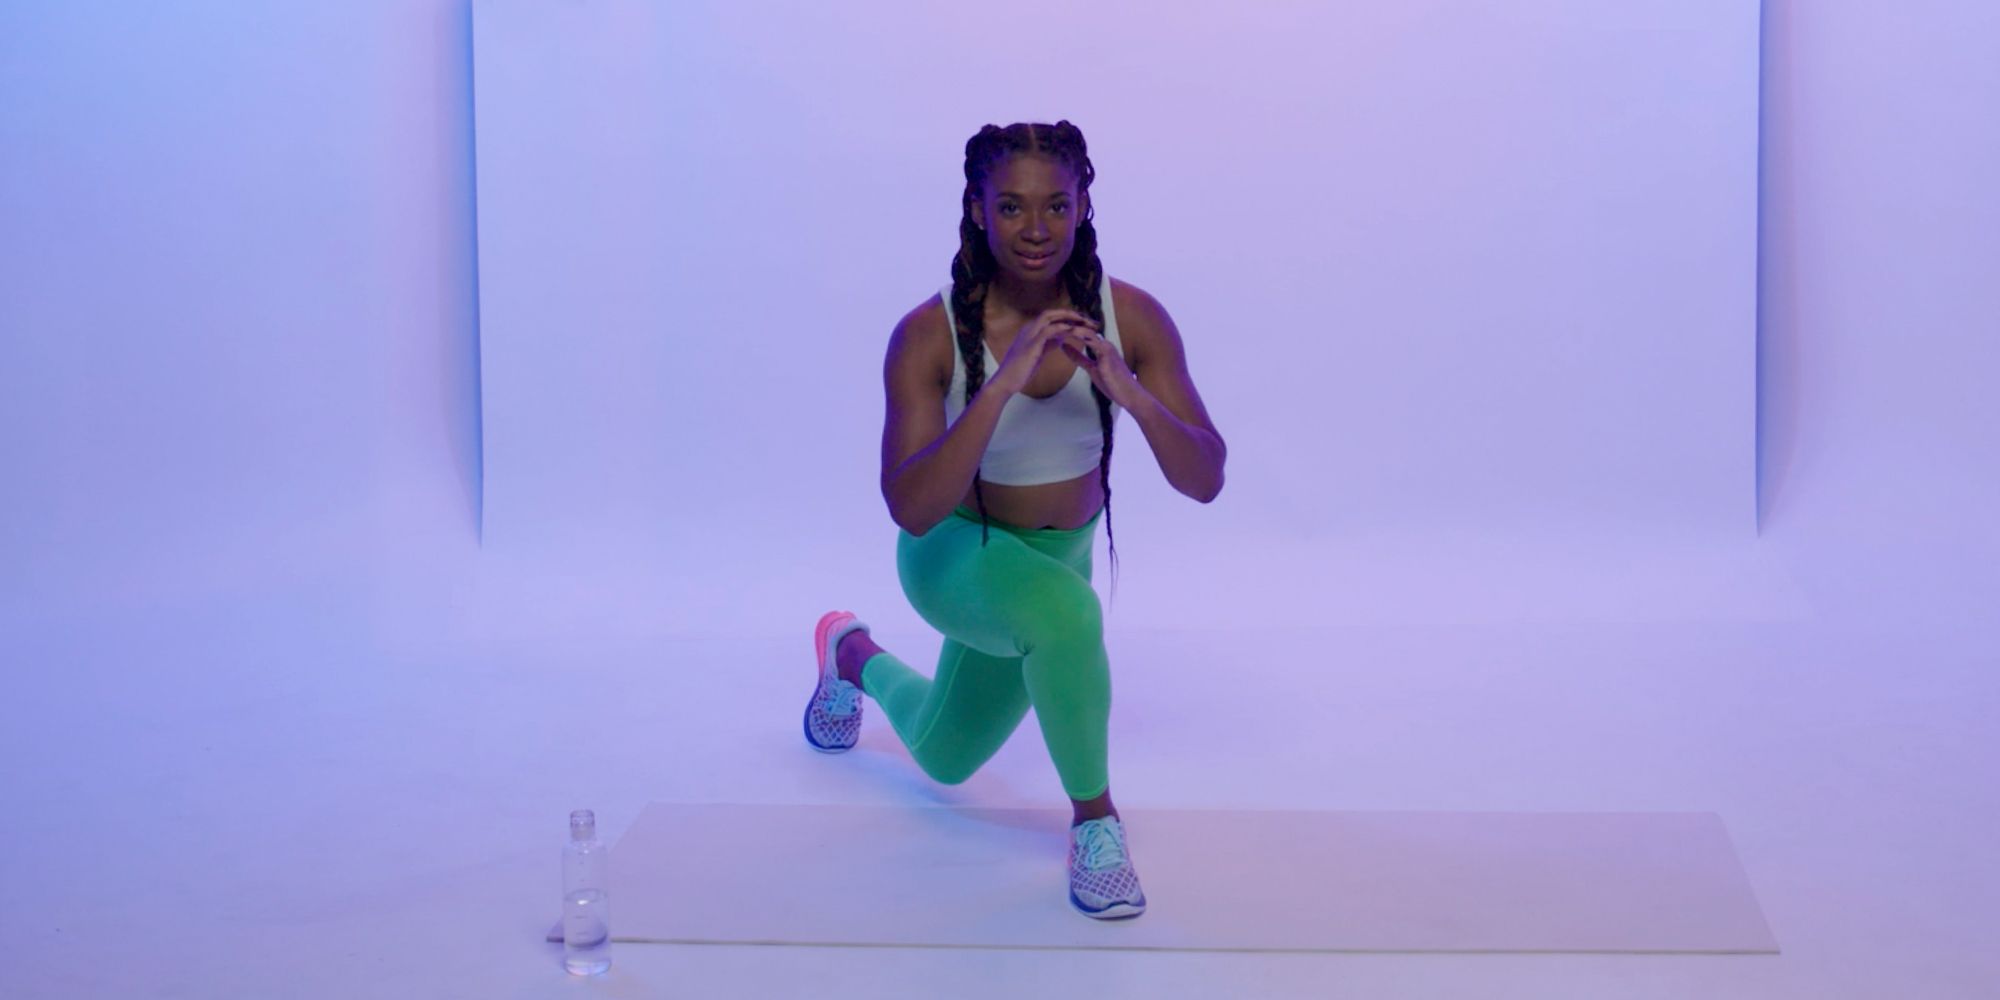 Swipe for a must-try lower body workout 👉🏾😍 It's only right to